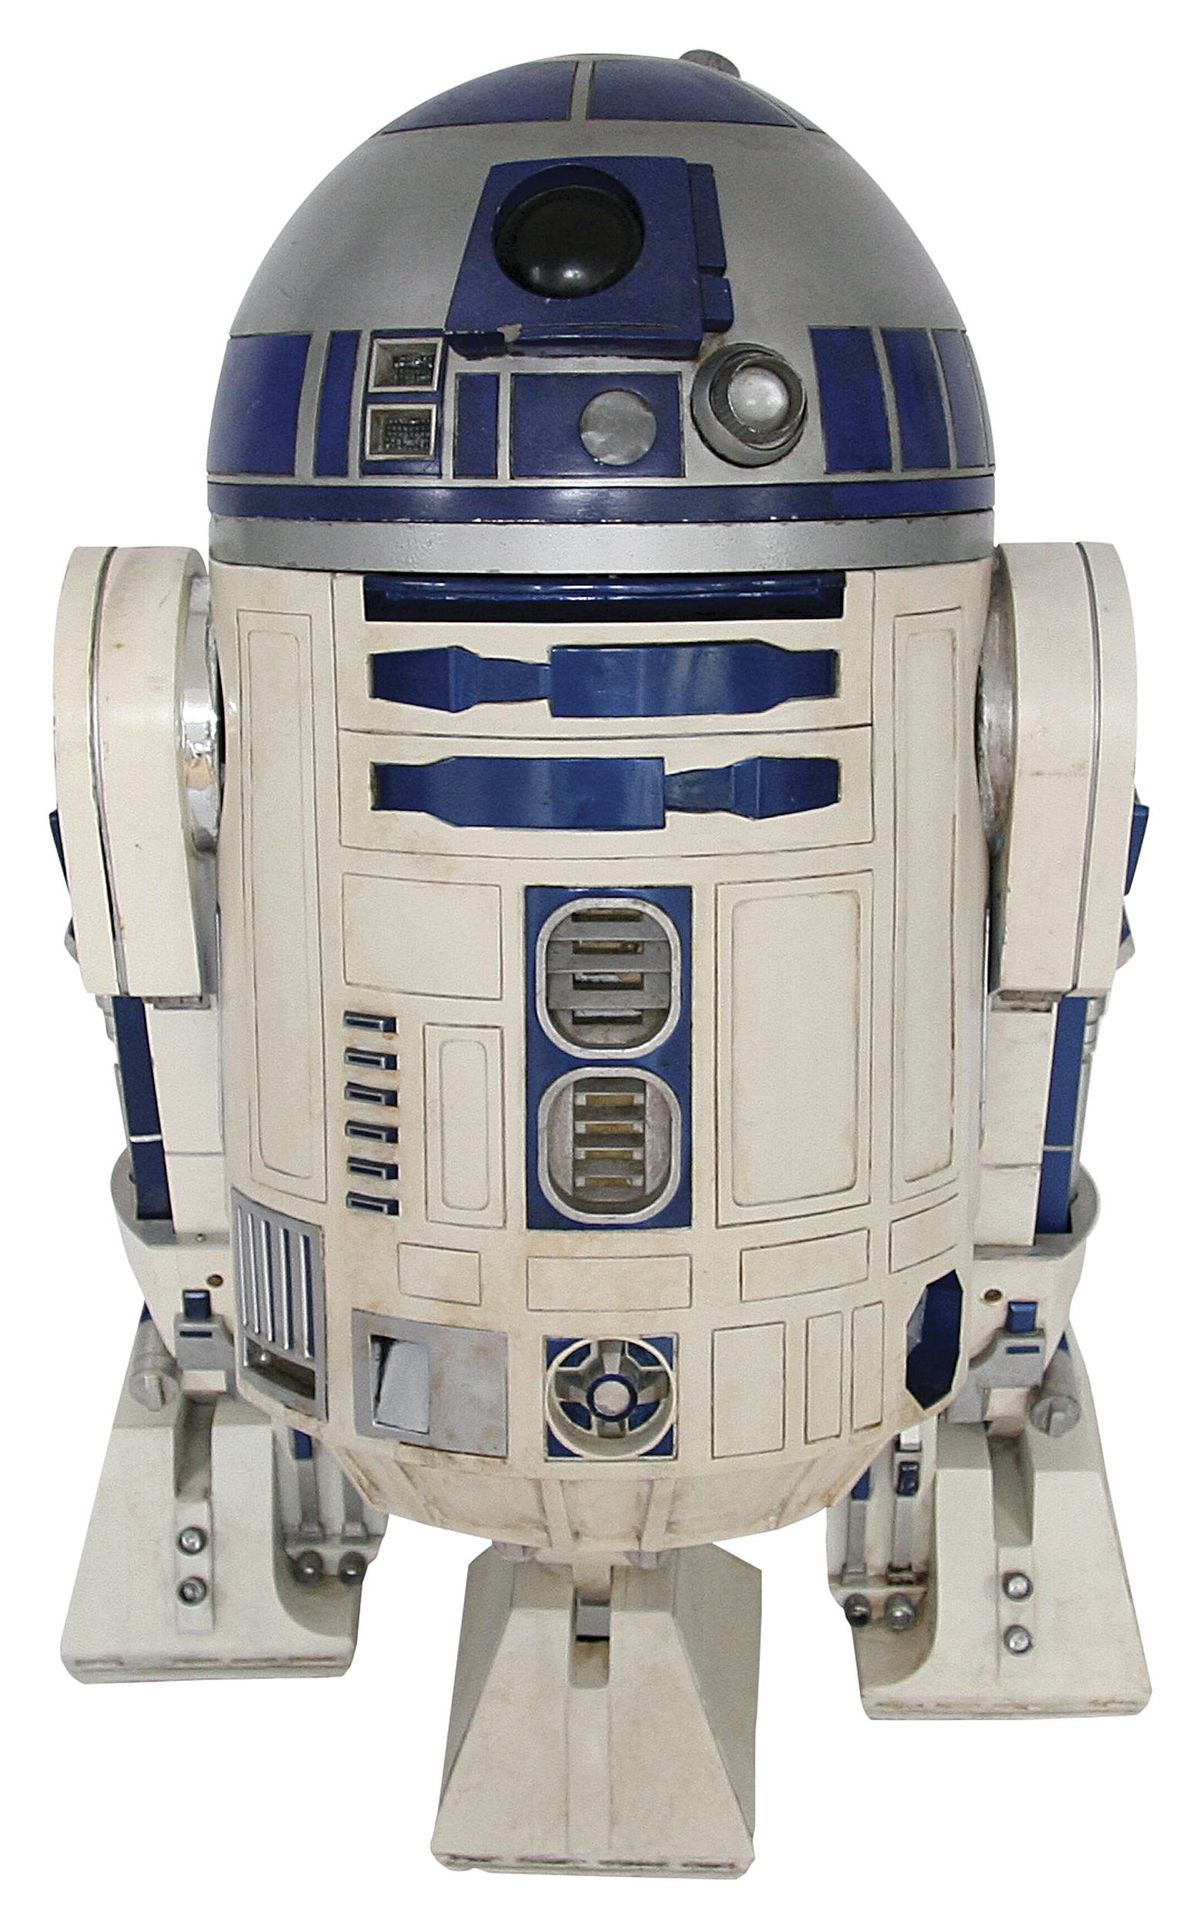 This 2017 photo provided by Profiles in History shows an R2-D2 droid pieced together over several years from different props used in the first five Star Wars movies, which will be among several Star Wars-related items up for auction on June 26-28, 2017, by the auction house in Calabasas, Calif. (AP)